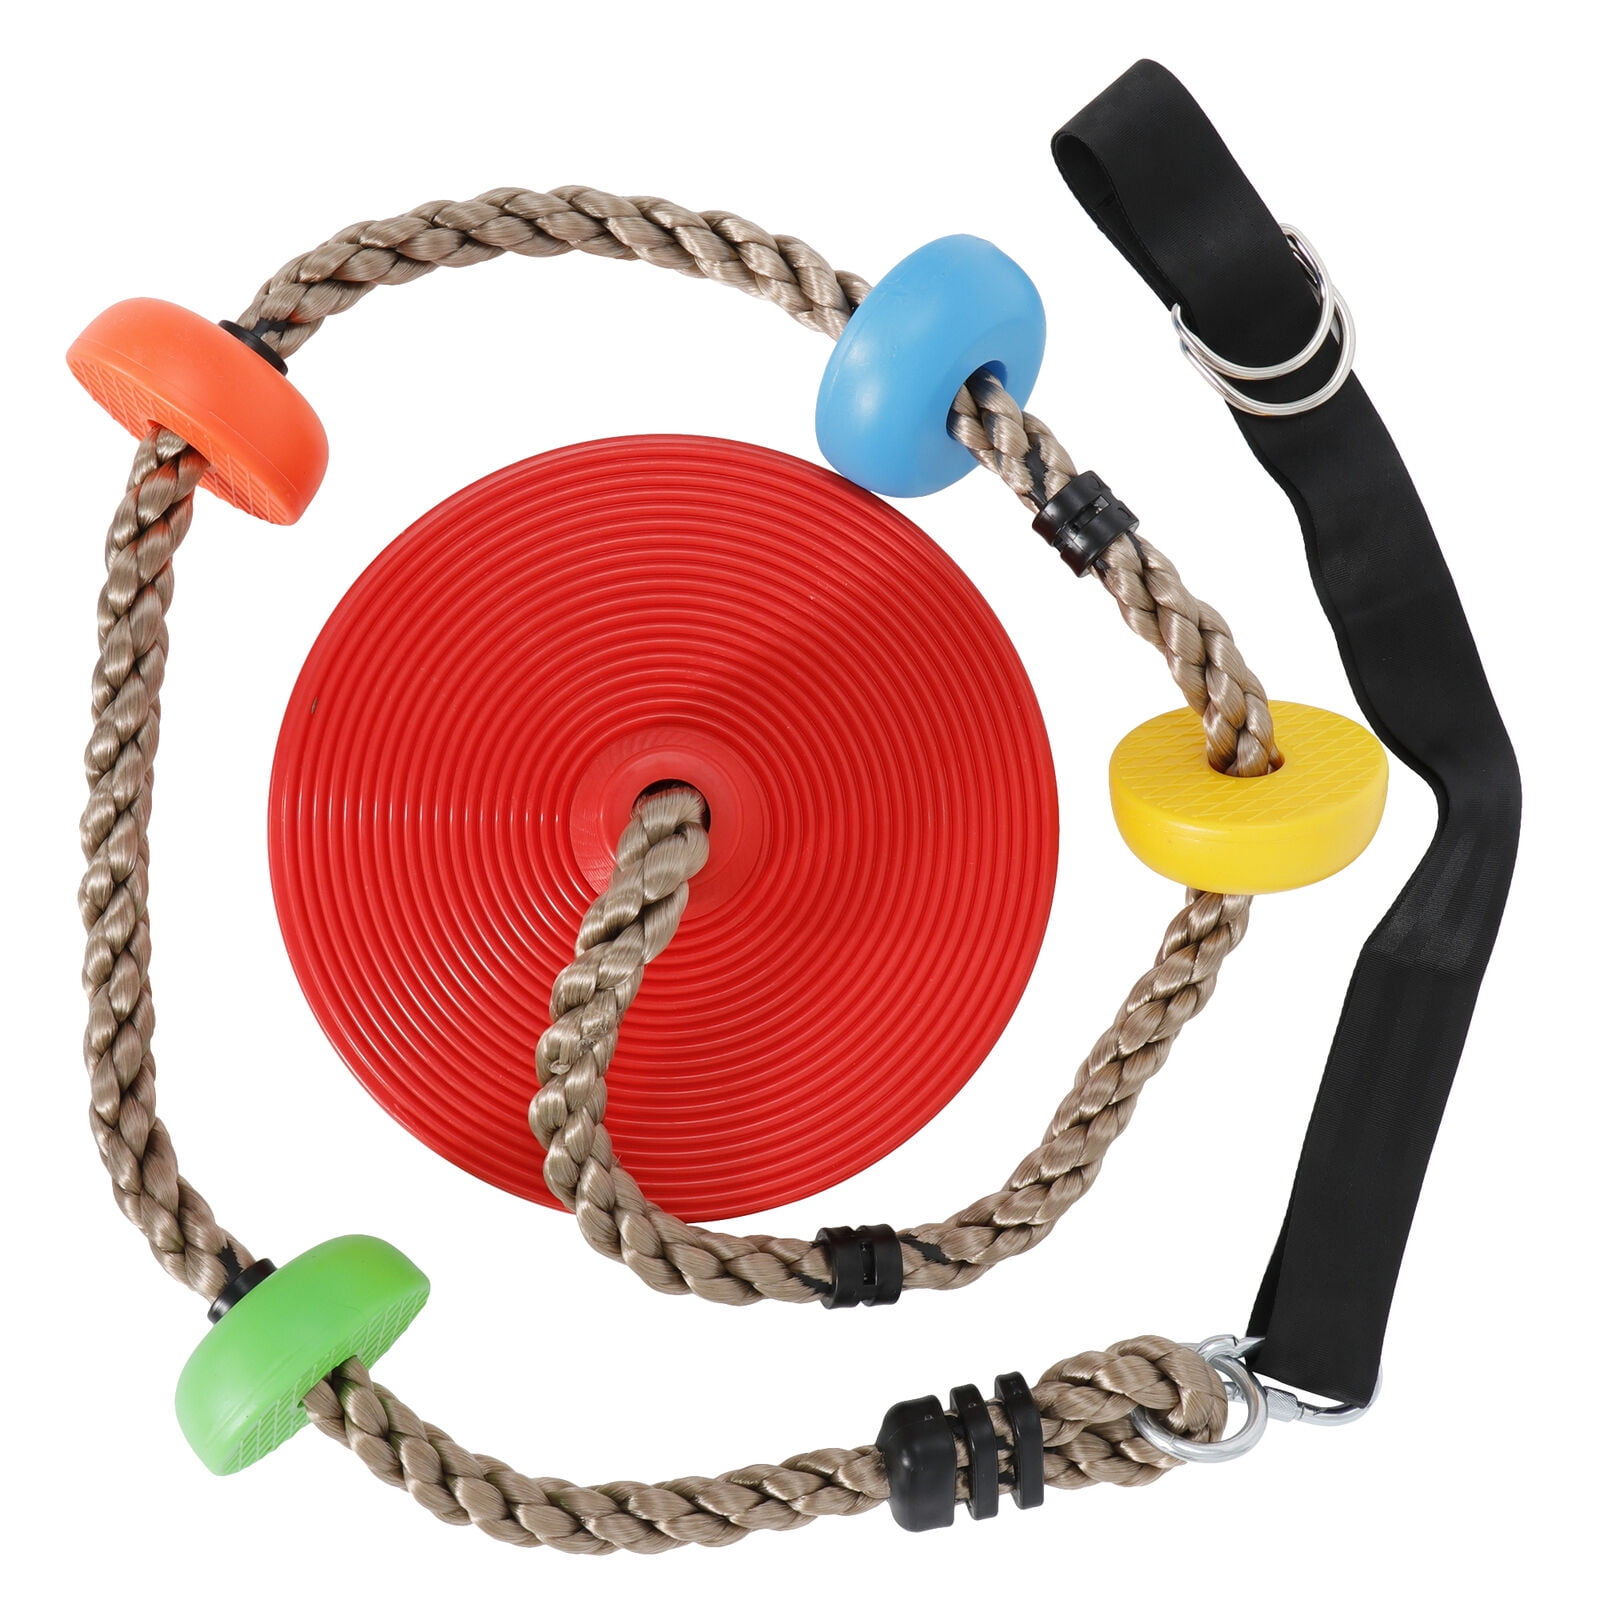 Details about   Tree Swing Gym Climbing Rope w/6Rung Swing Seat Playground Kids Outdoor Fun 